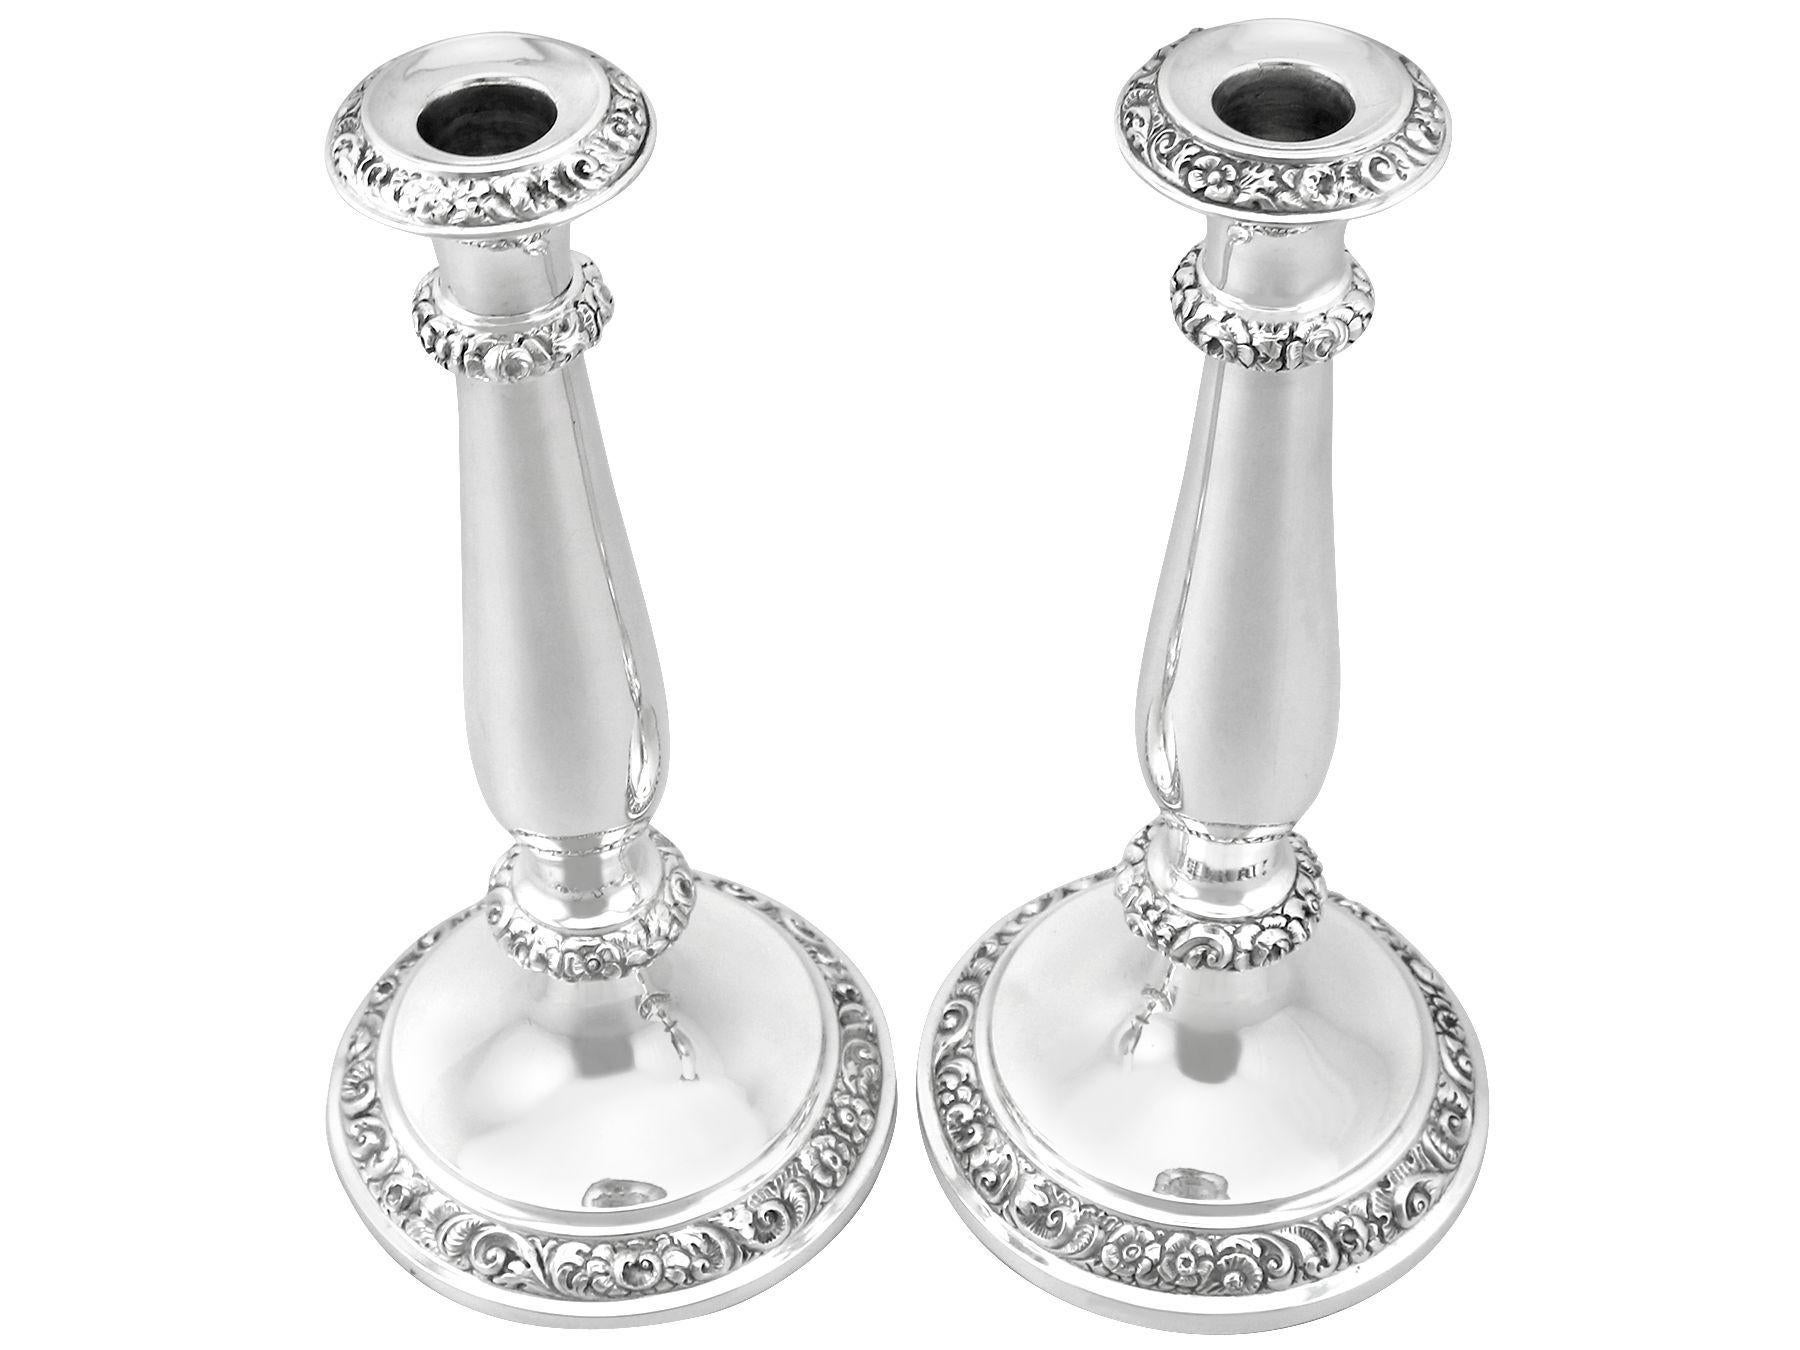 An exceptional, fine and impressive pair of antique Austrian silver candlesticks; an addition to our continental silverware collection

These exceptional antique Austrian silver candlesticks have a circular rounded form.

The waisted shaped